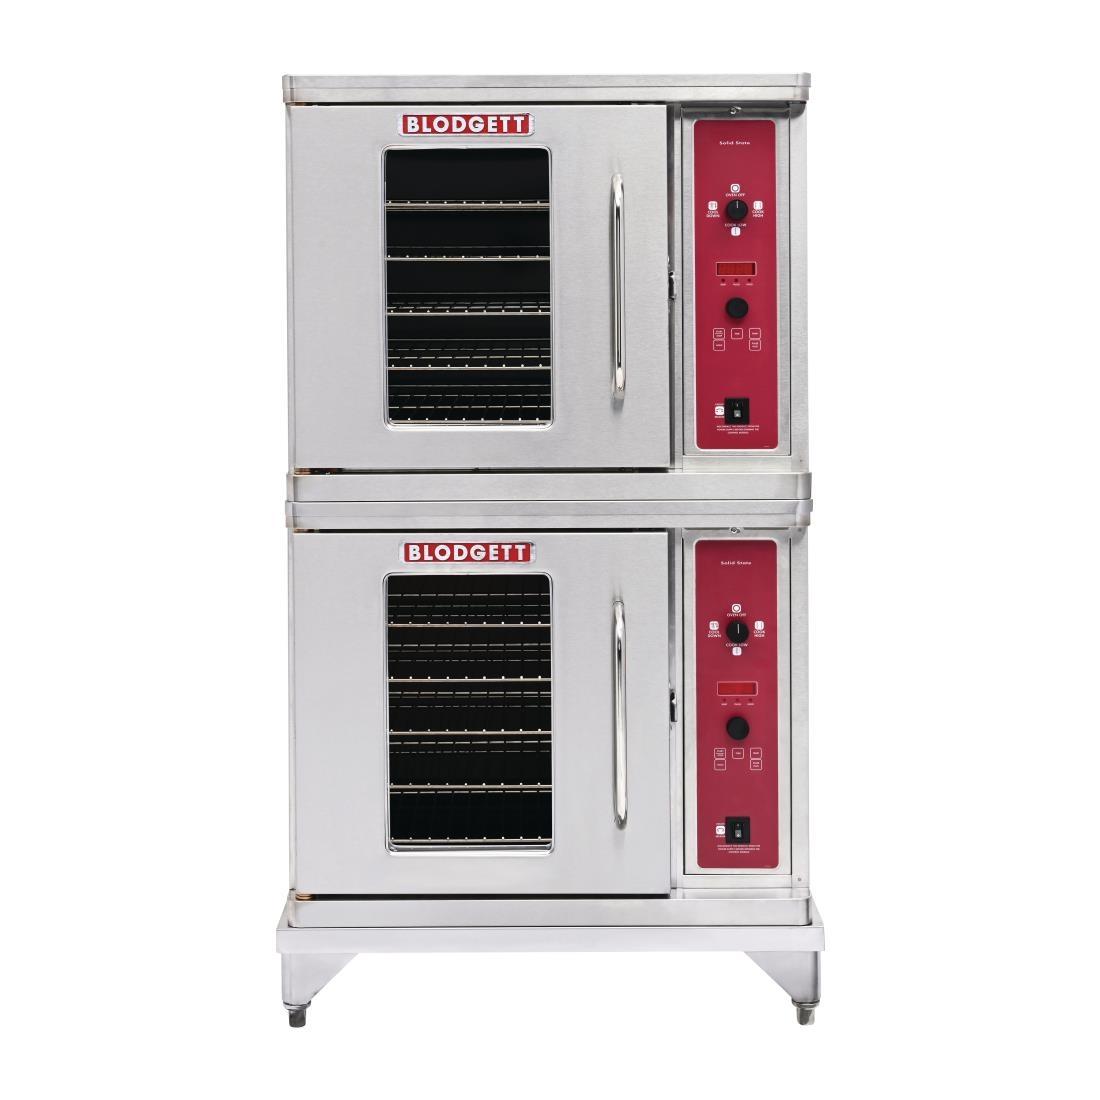 Blodgett Half Size Double Stacked Convection Oven CTB-2 - FP875  - 3